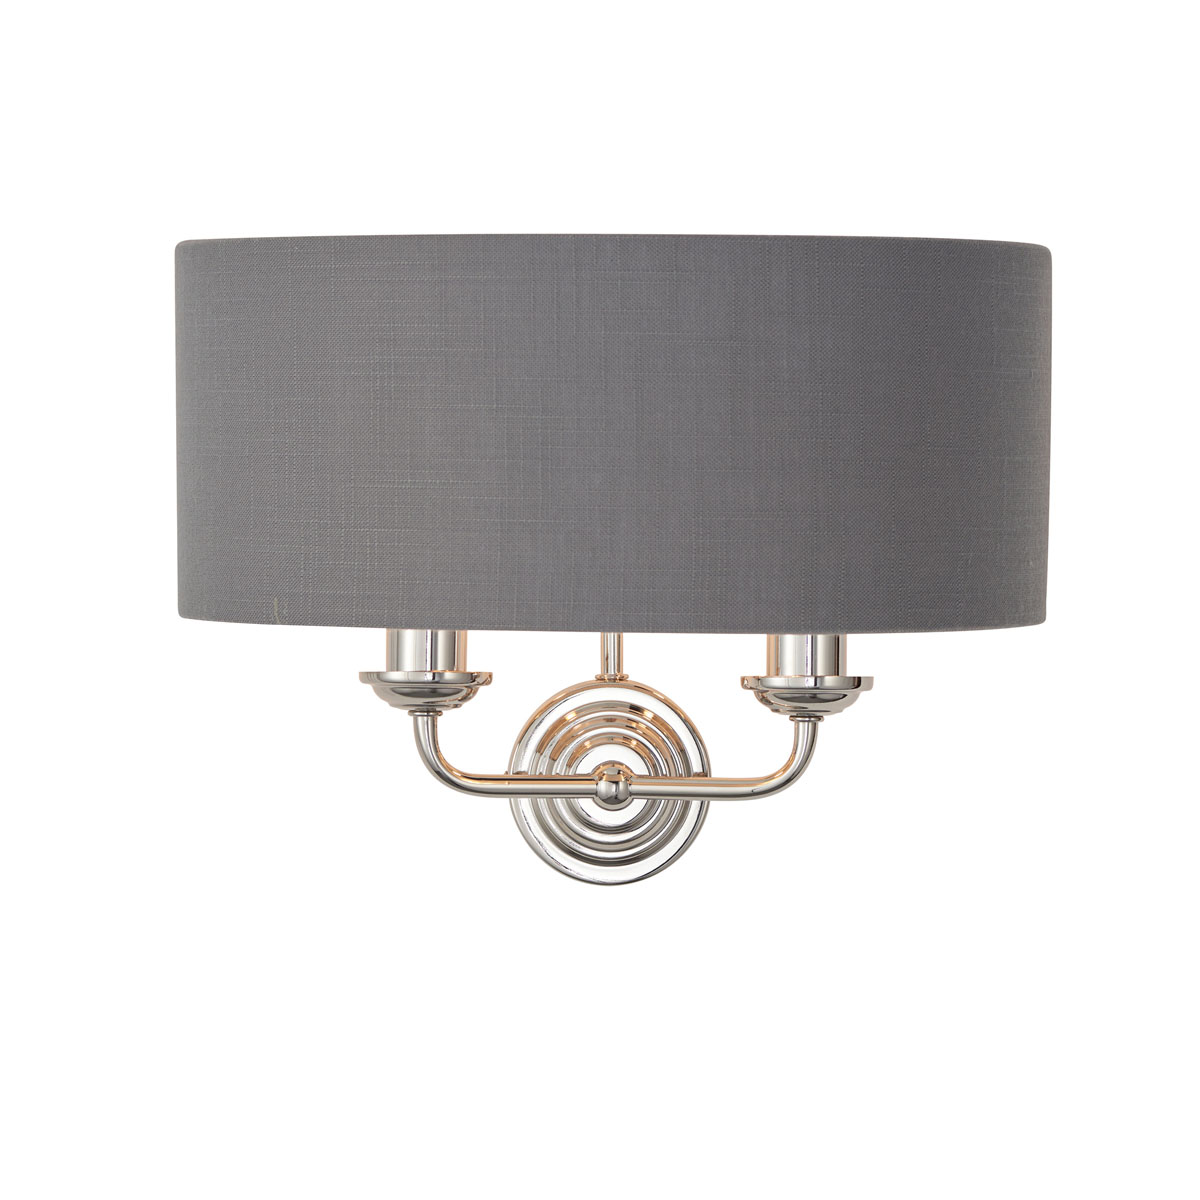 Highclere 2 Wall Light Nickel & Charcoal